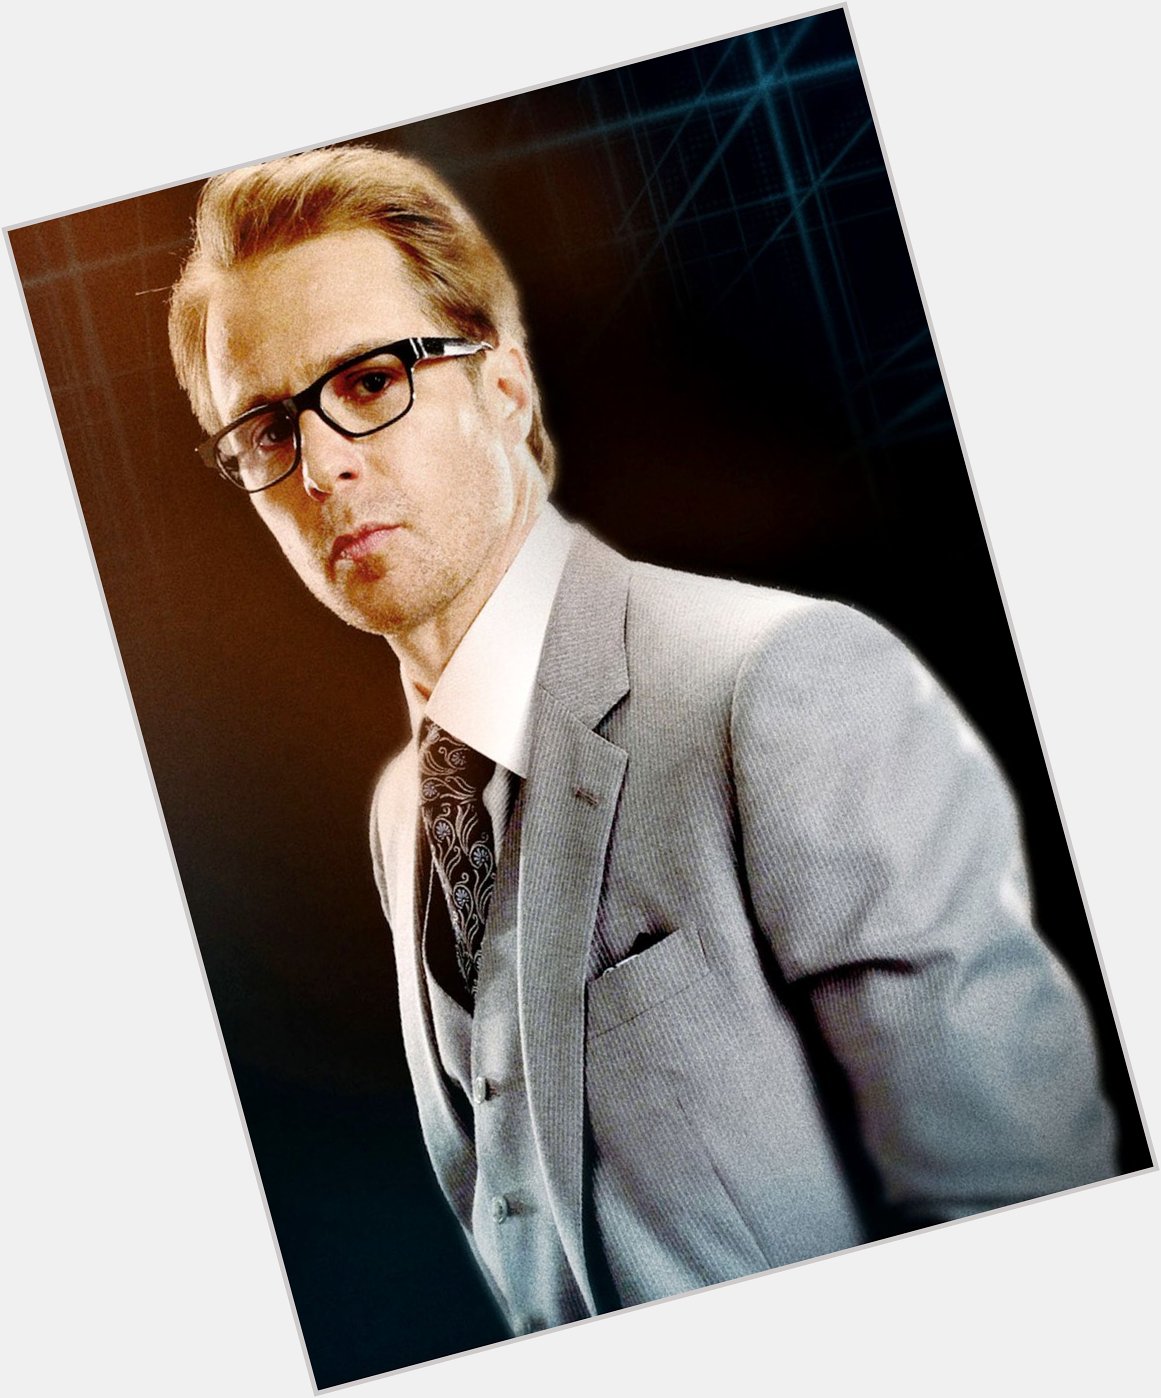 Happy Birthday to Sam Rockwell, who played secondary antagonist Justin Hammer in Iron Man 2 